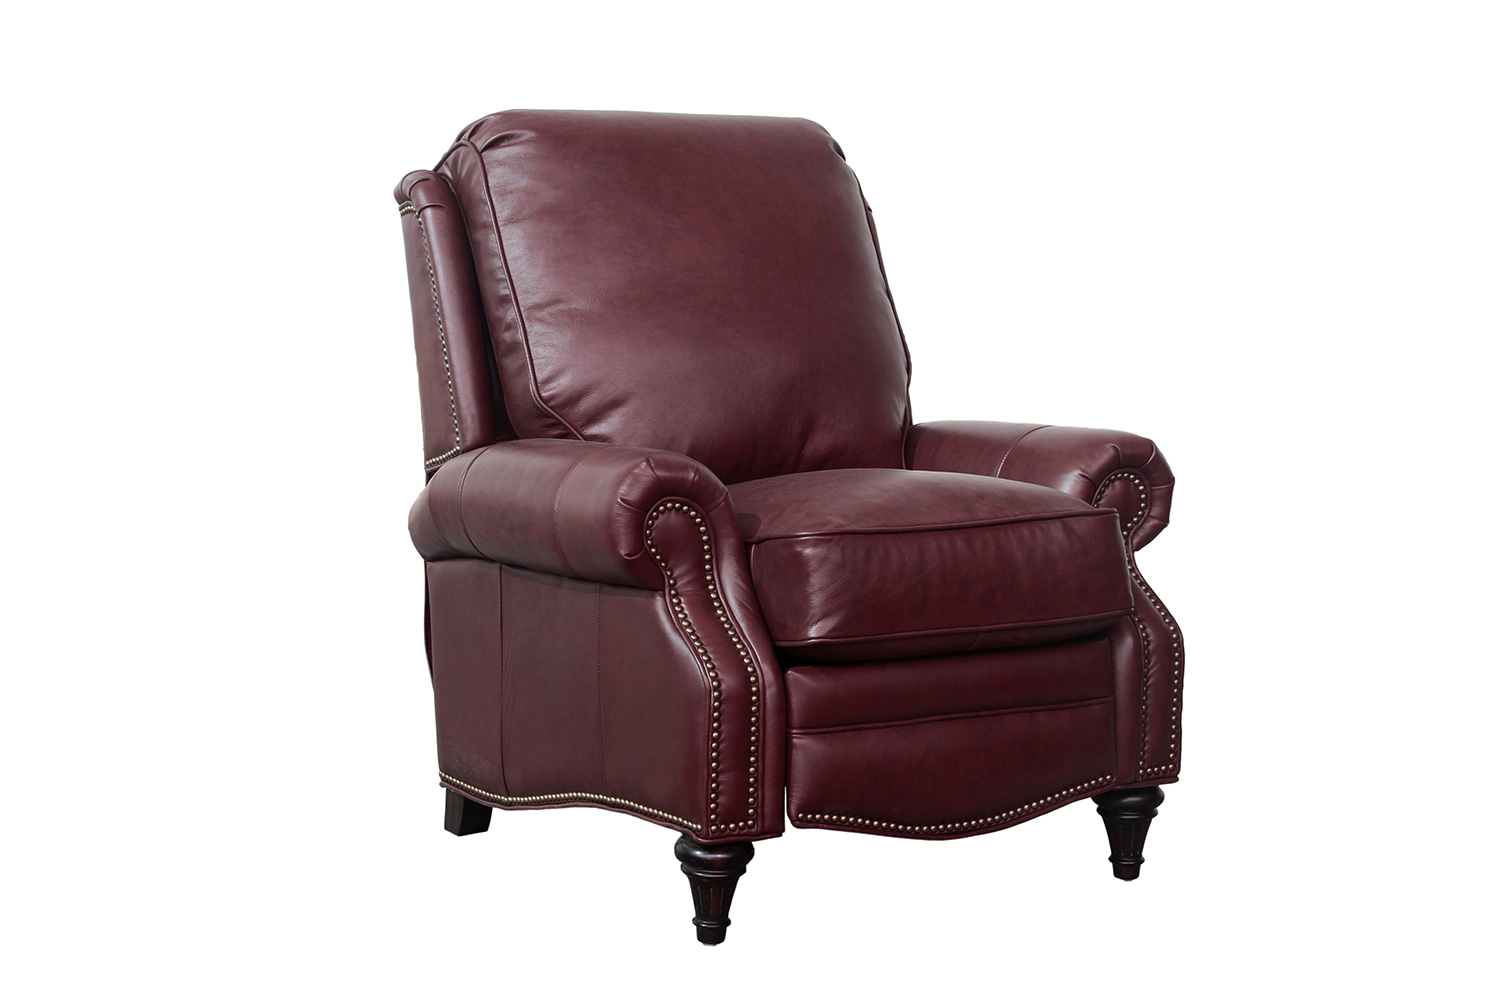 Barcalounger Avery Recliner Chair - Shoreham Wine/All Leather